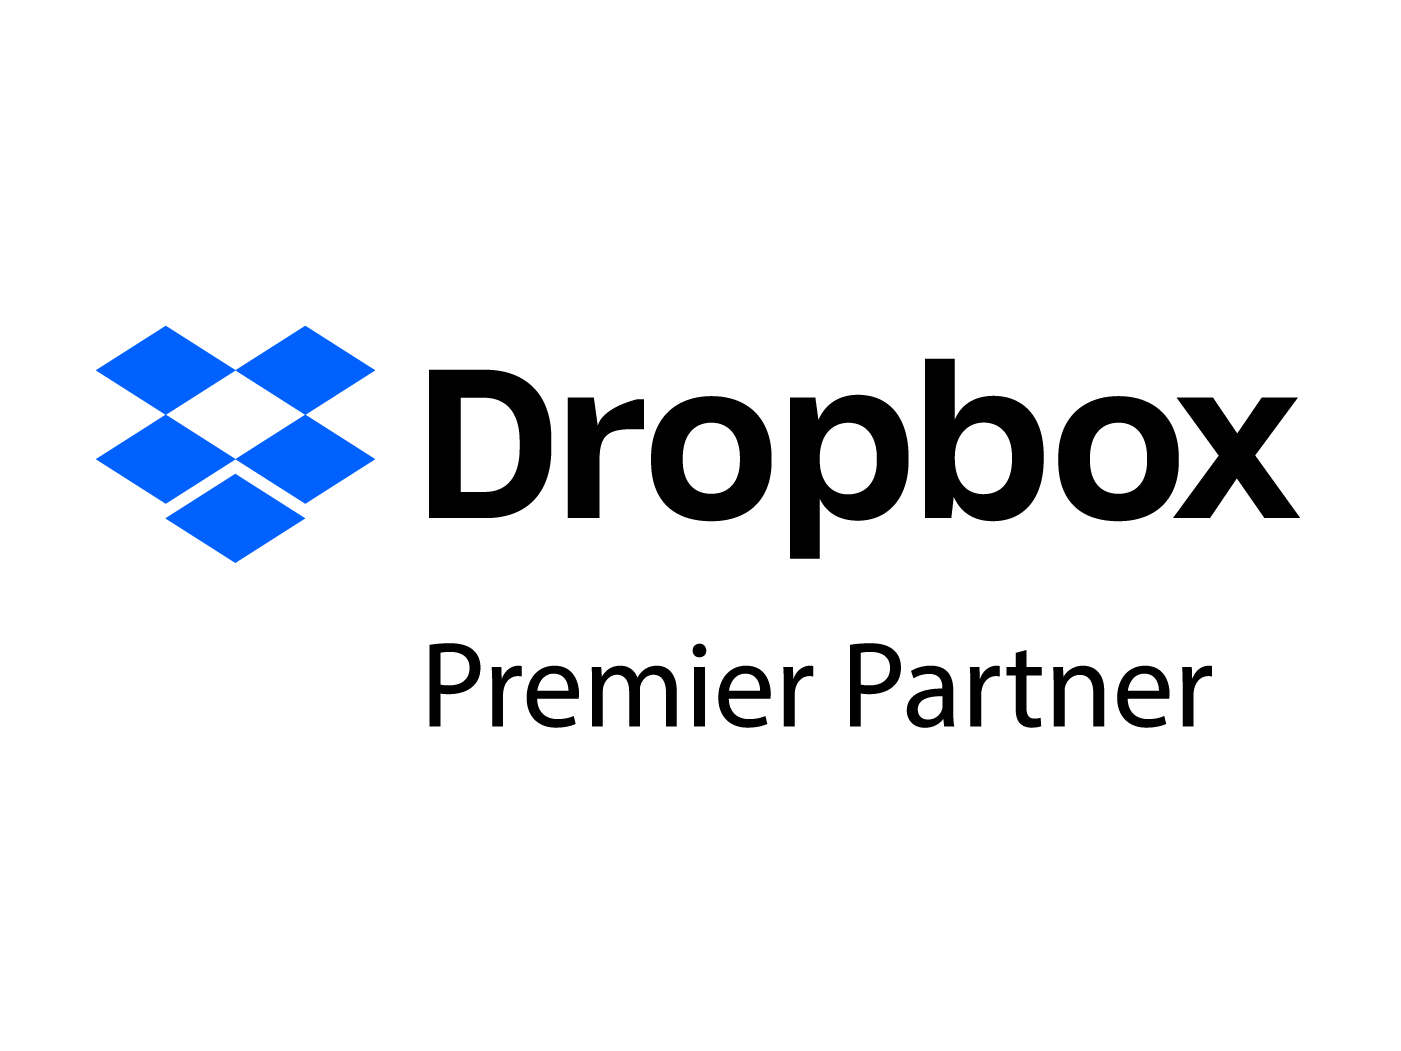 Dropbox selected Boxcryptor as one of their Premier Technology Partners to provide an additional security layer for you.